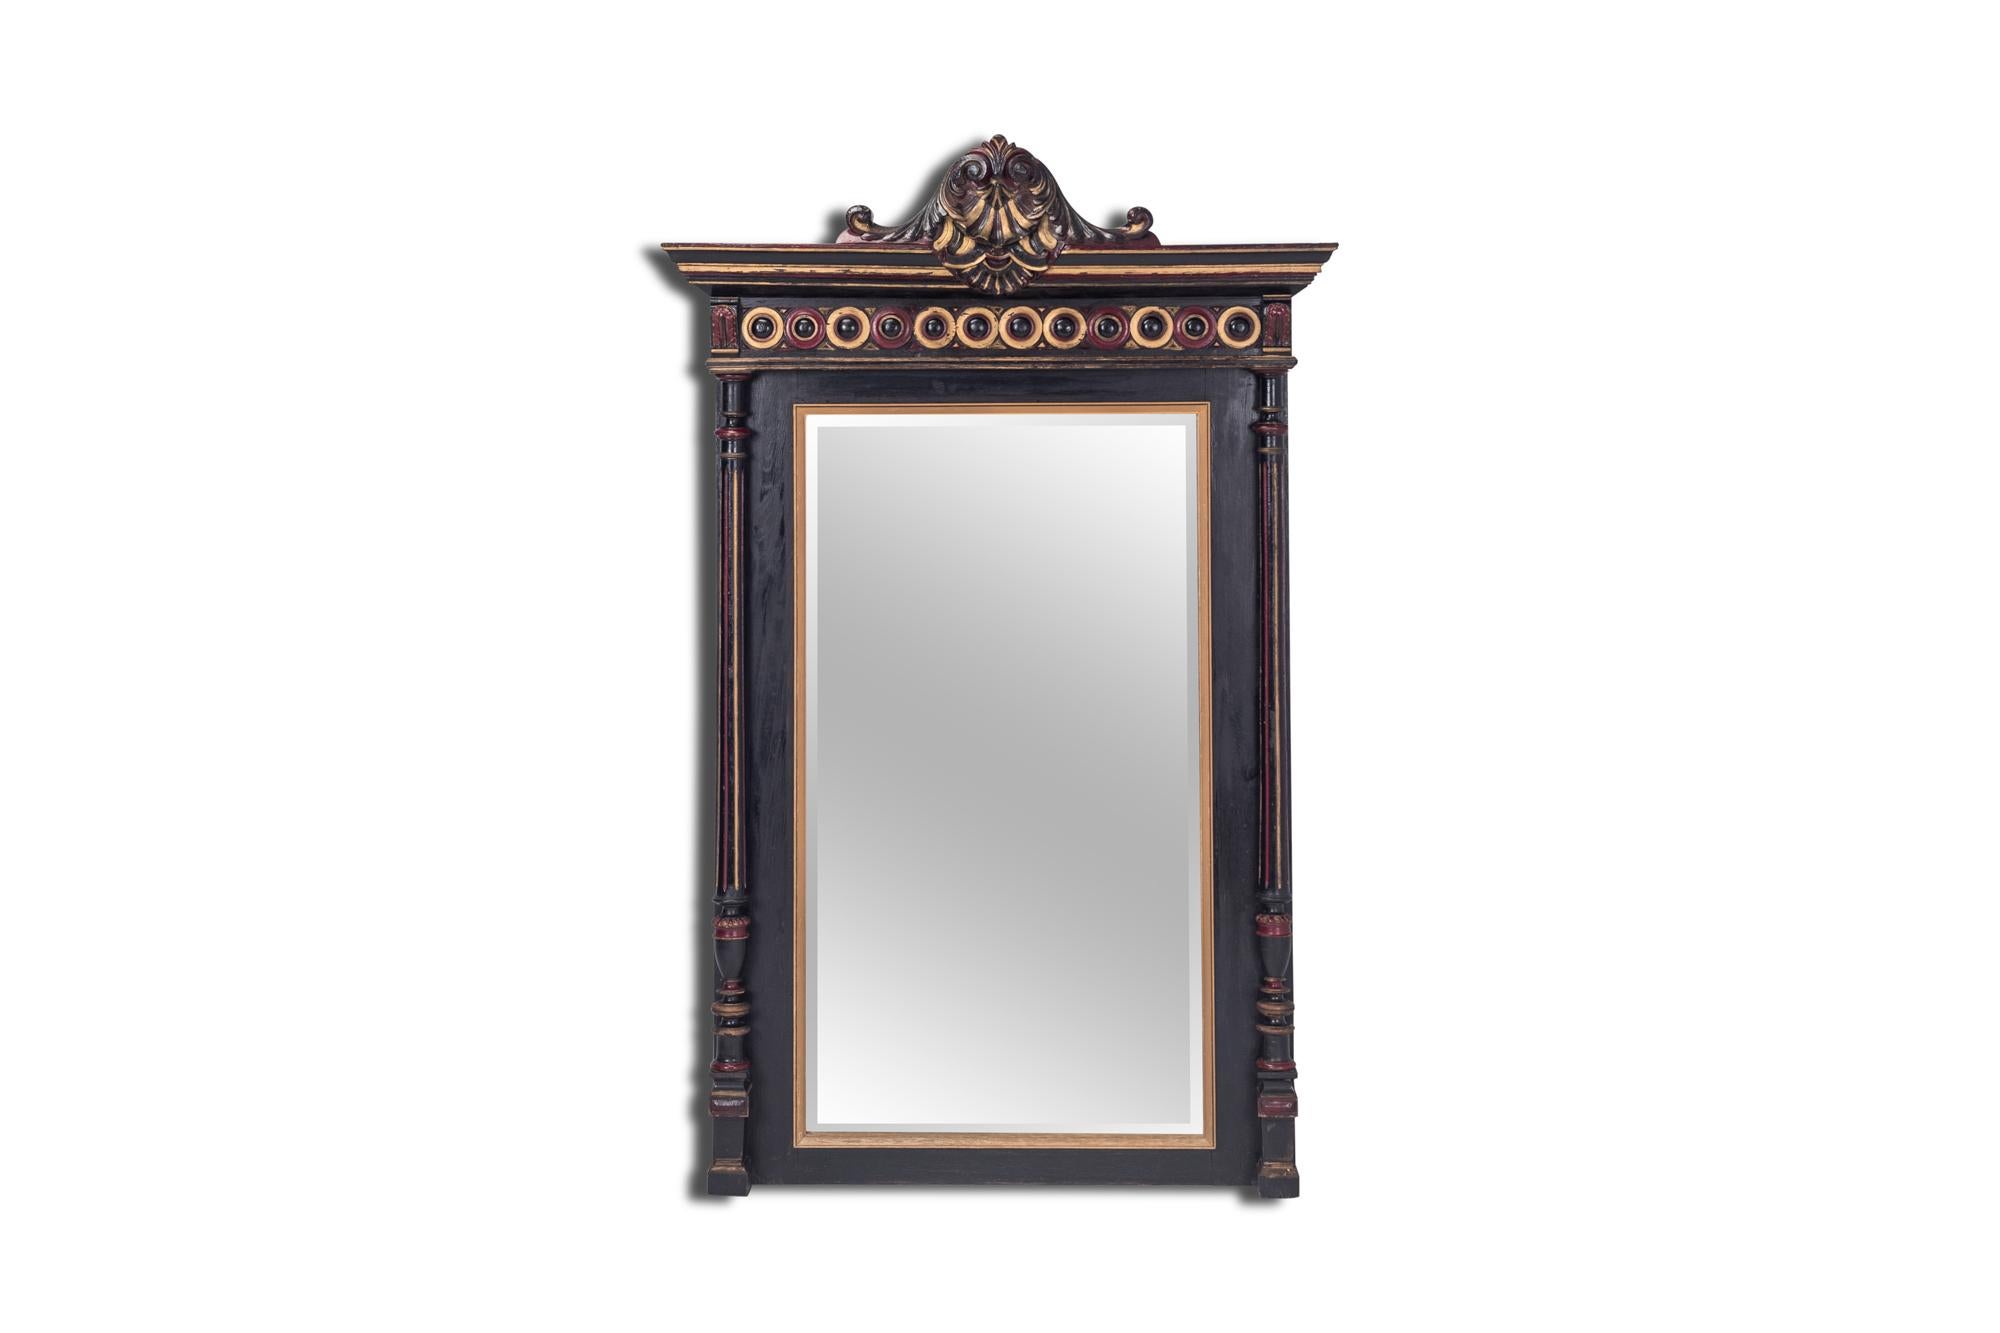 Regency style French overmantel mirror. 

This 19th century Piece is hand-carved and hand-painted, showing stunning shapes and details. The color combination; black, gold and royal red give this piece an extraordinary rich appearance.